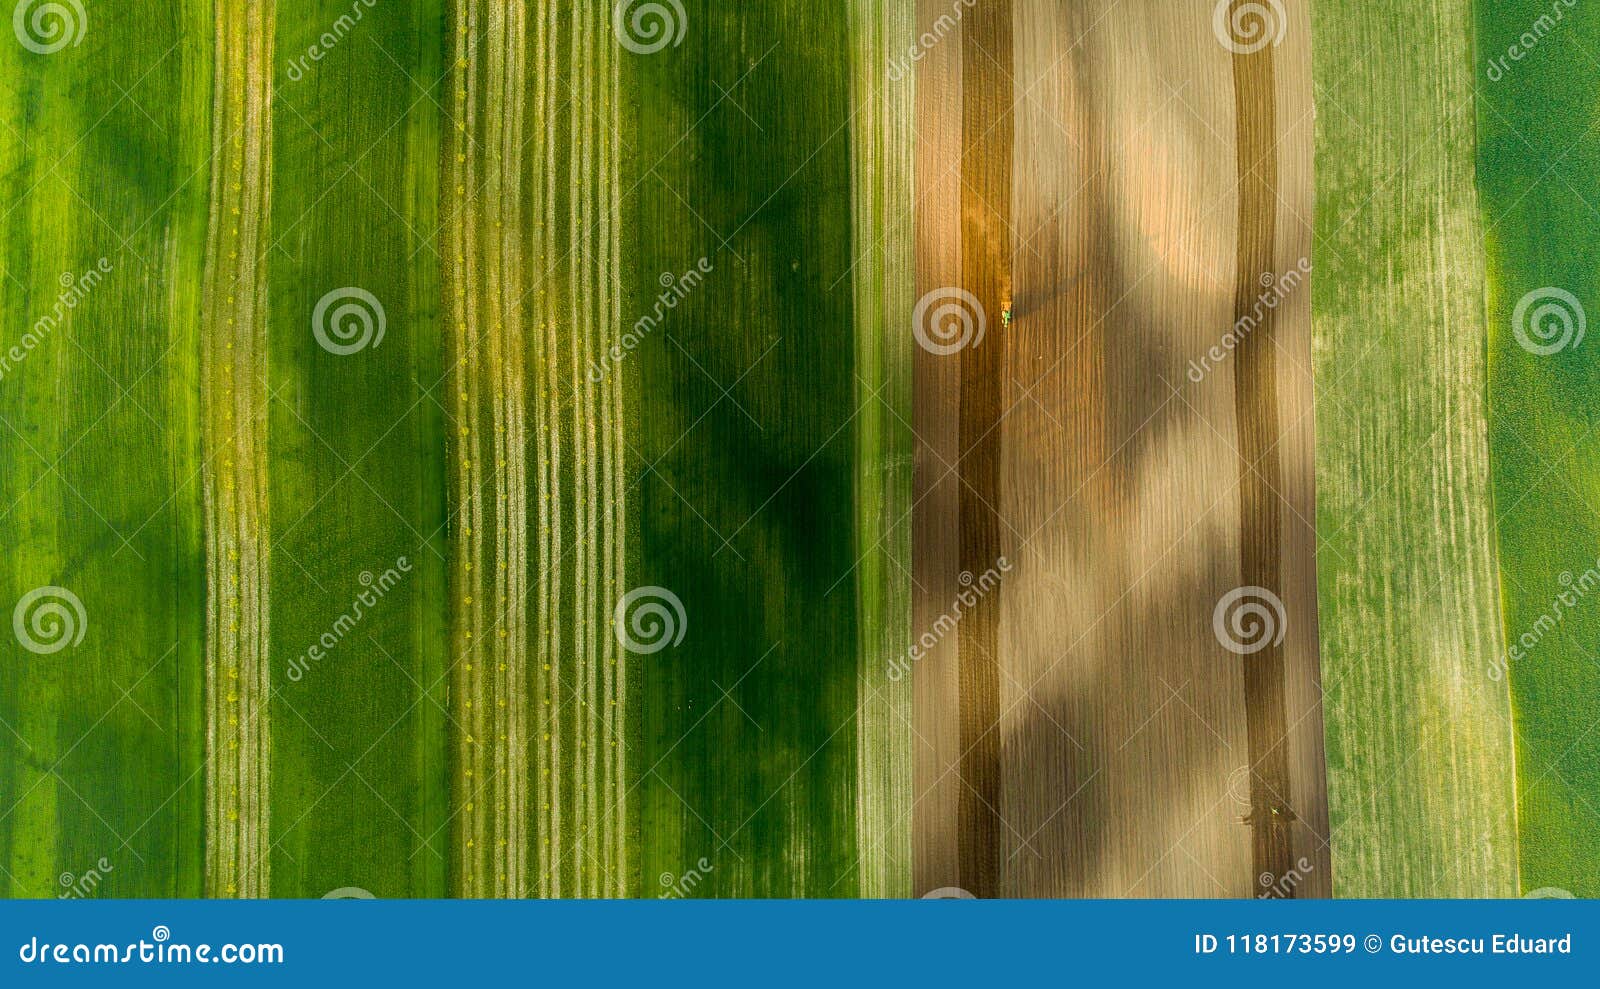 aerial view of wheat fields and crops in the summer with tractor on work